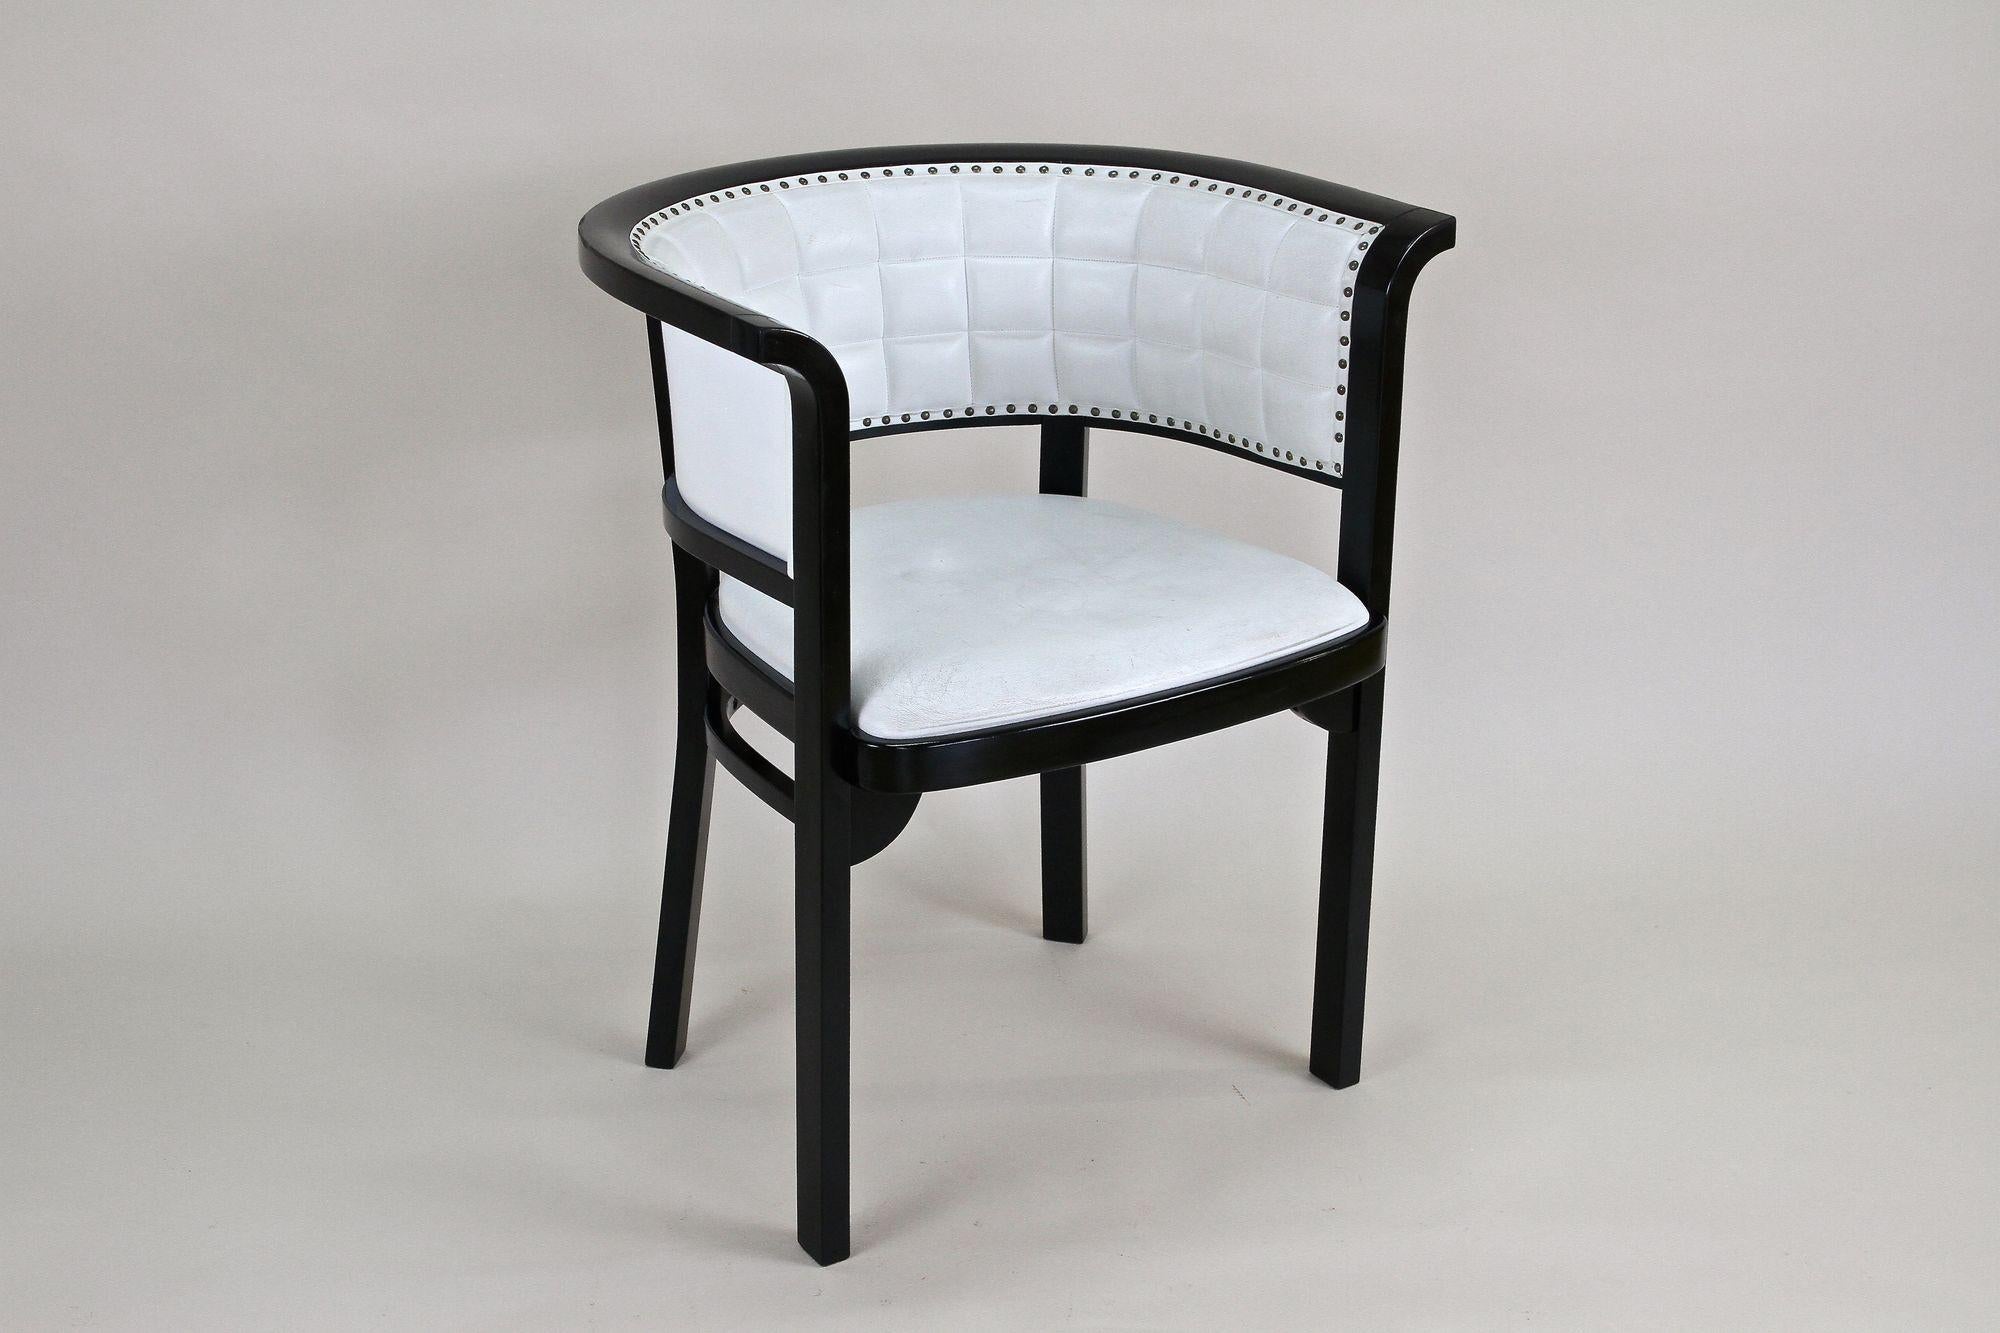 Black Thonet Armchair with White Leather, Design Marcel Kammerer, at circa 1980 For Sale 10